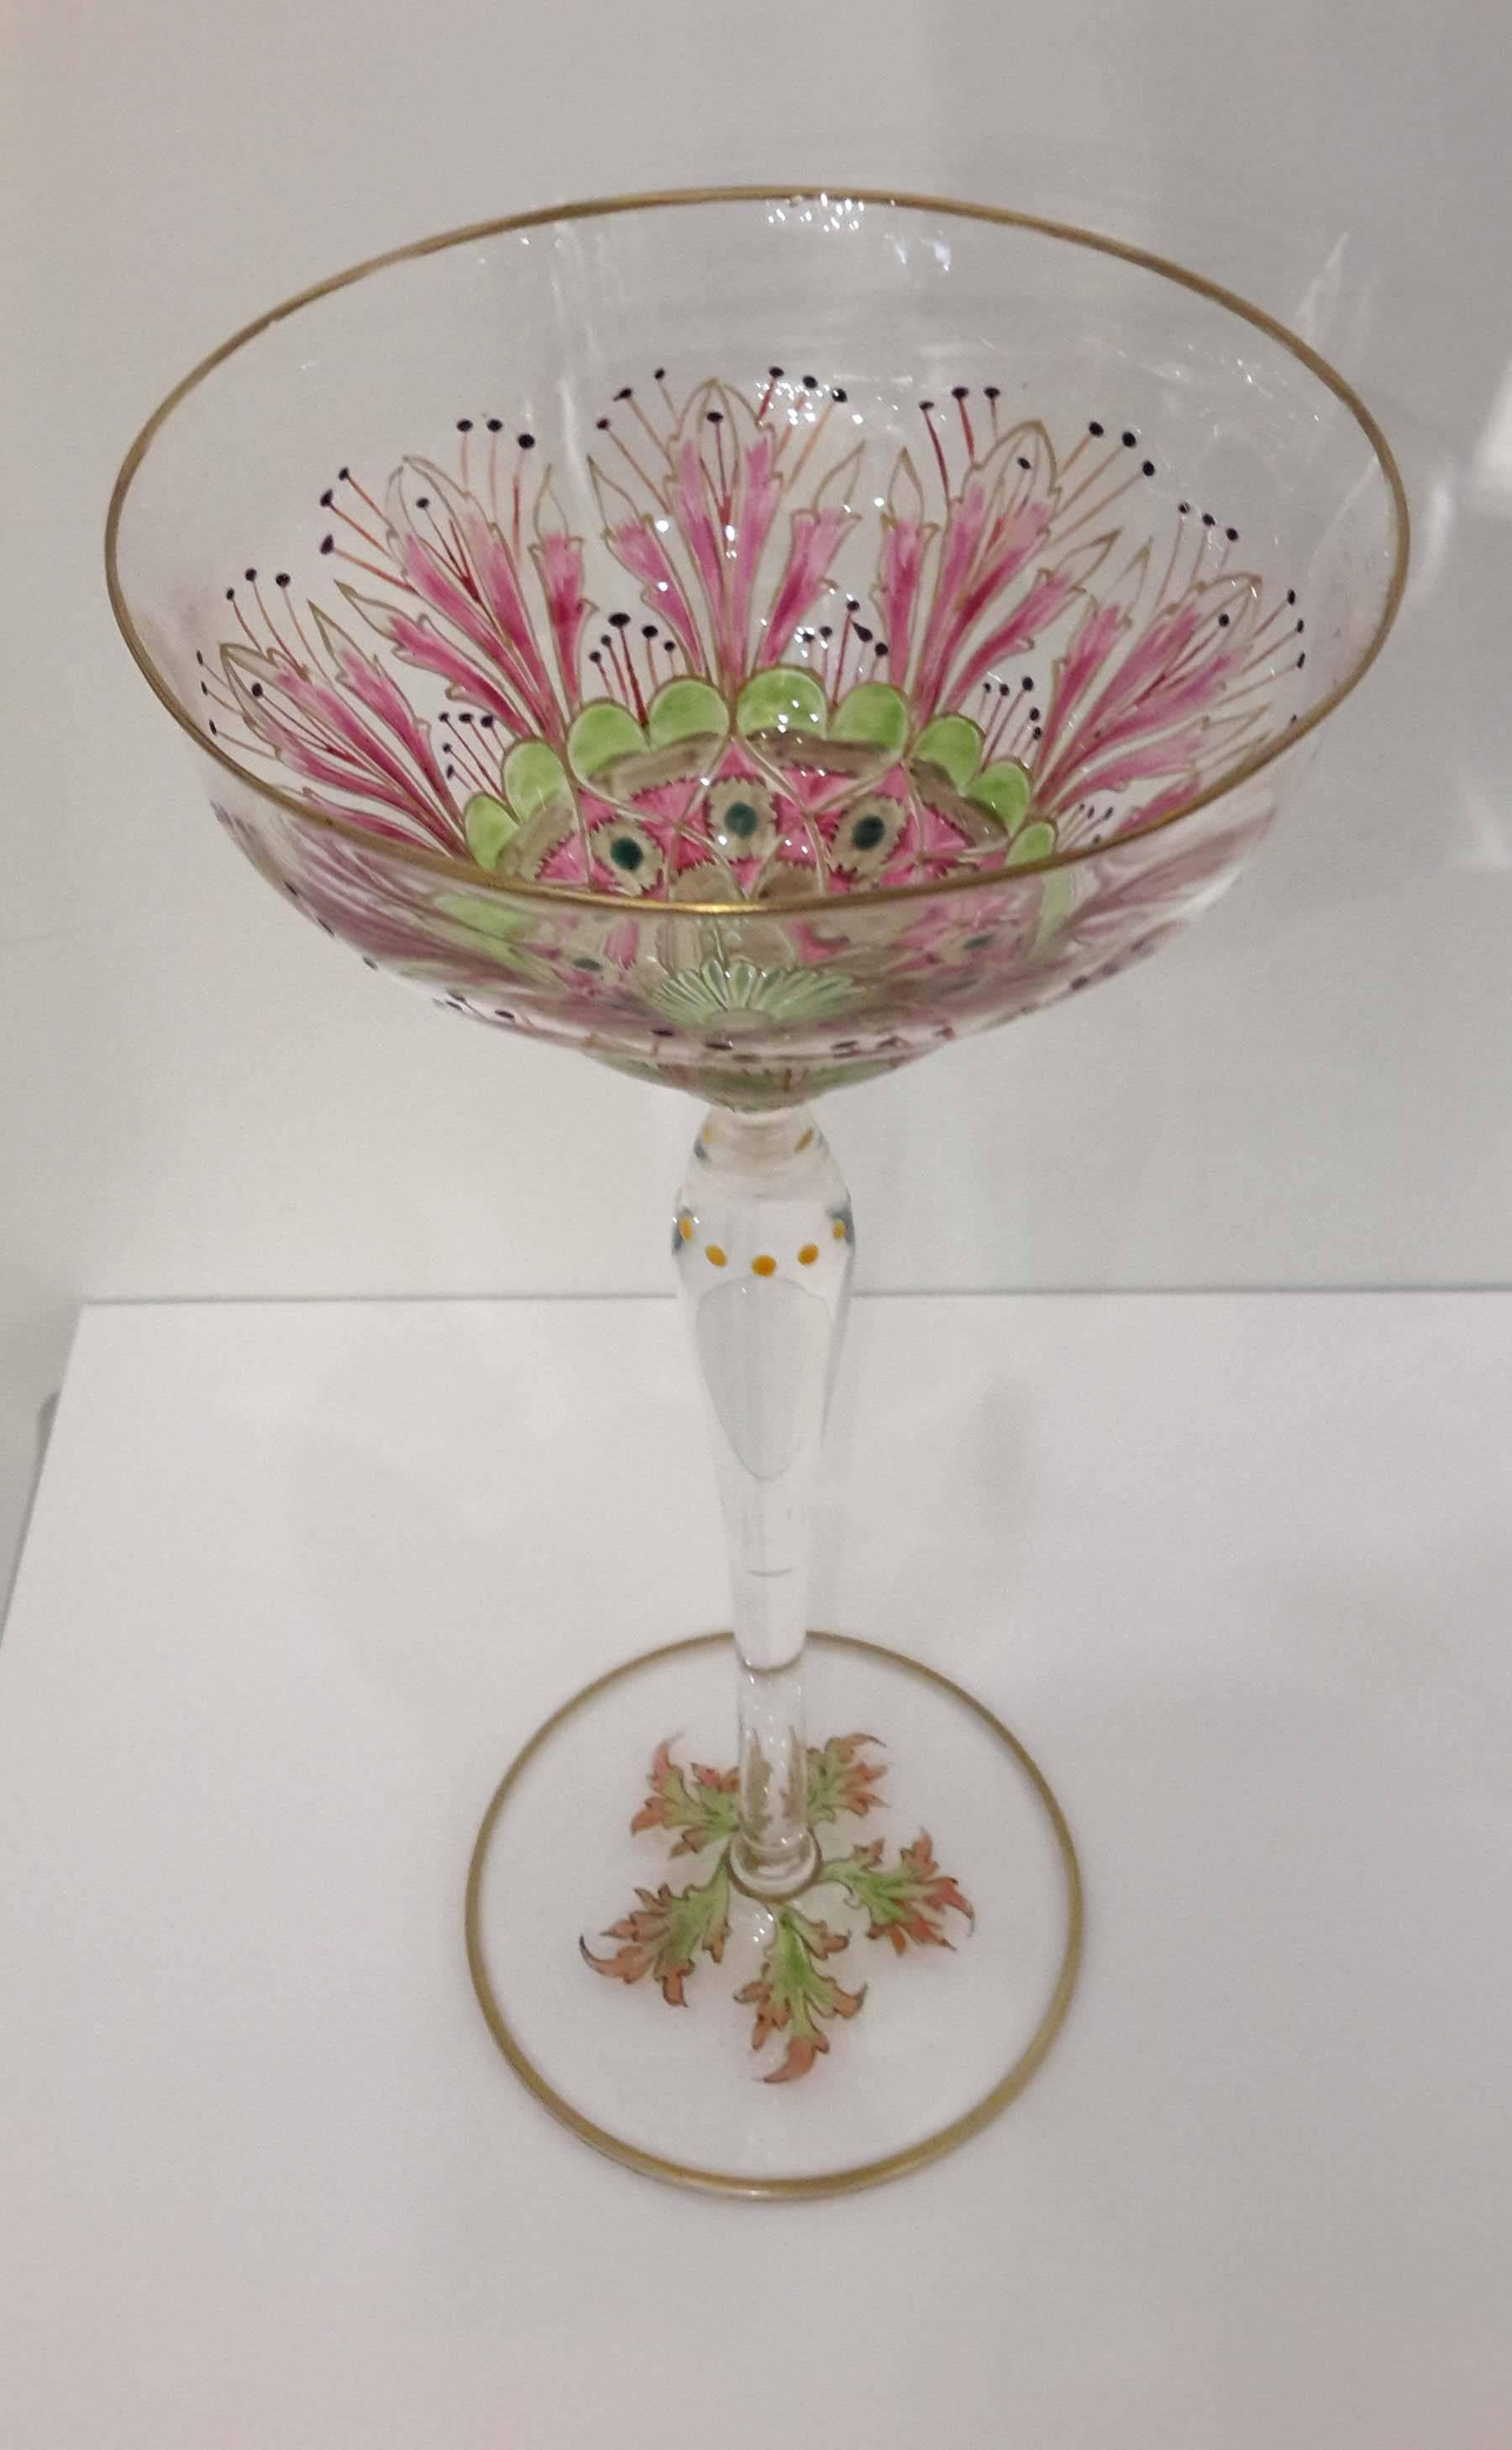 Stunning and exceedingly rare monumental Meyr's Neffe hand enameled 'Flower Form' champagne goblet. This is the largest enameled flower form glass that we have ever seen and this is the first time that we have acquired such beautiful pieces, circa